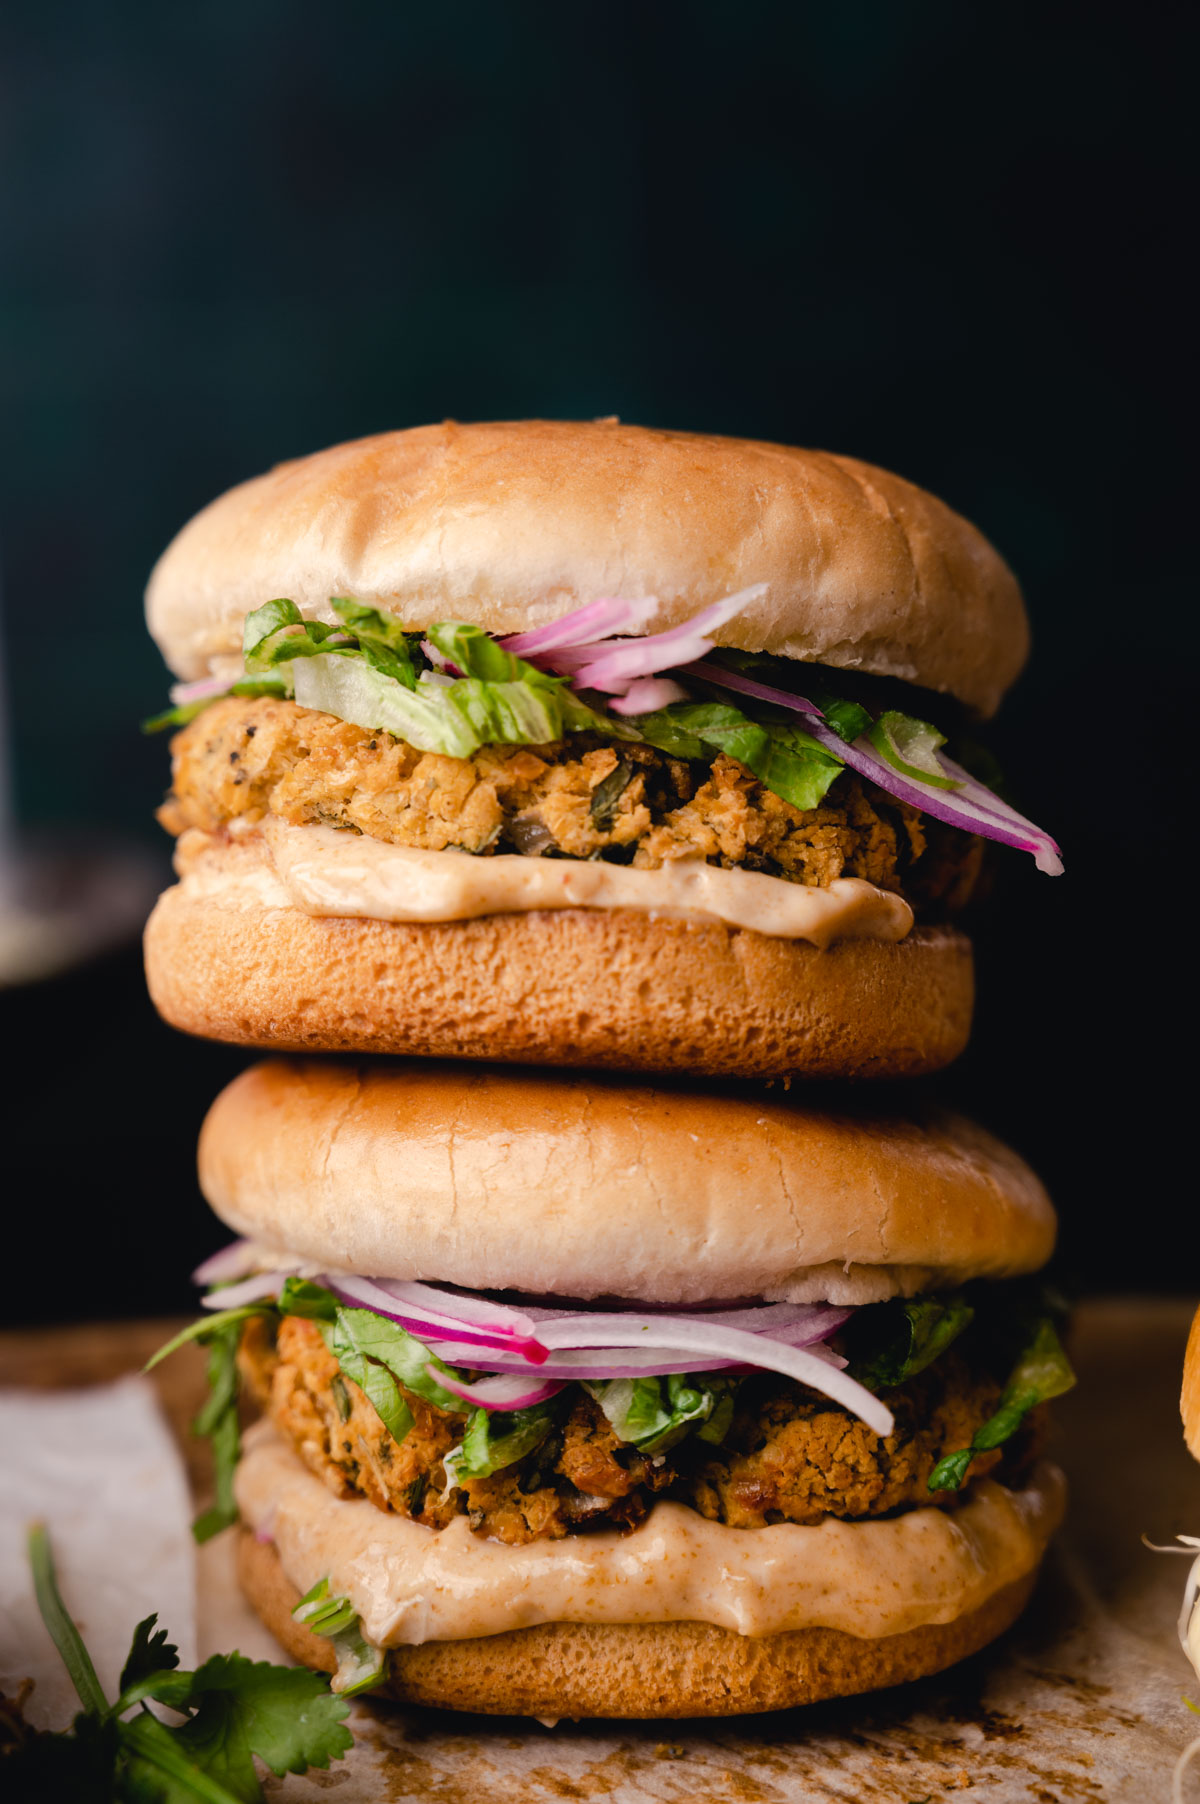 Two stacked fried chicken sandwiches with lettuce, onions, and sauce on sesame buns, on a dark background.